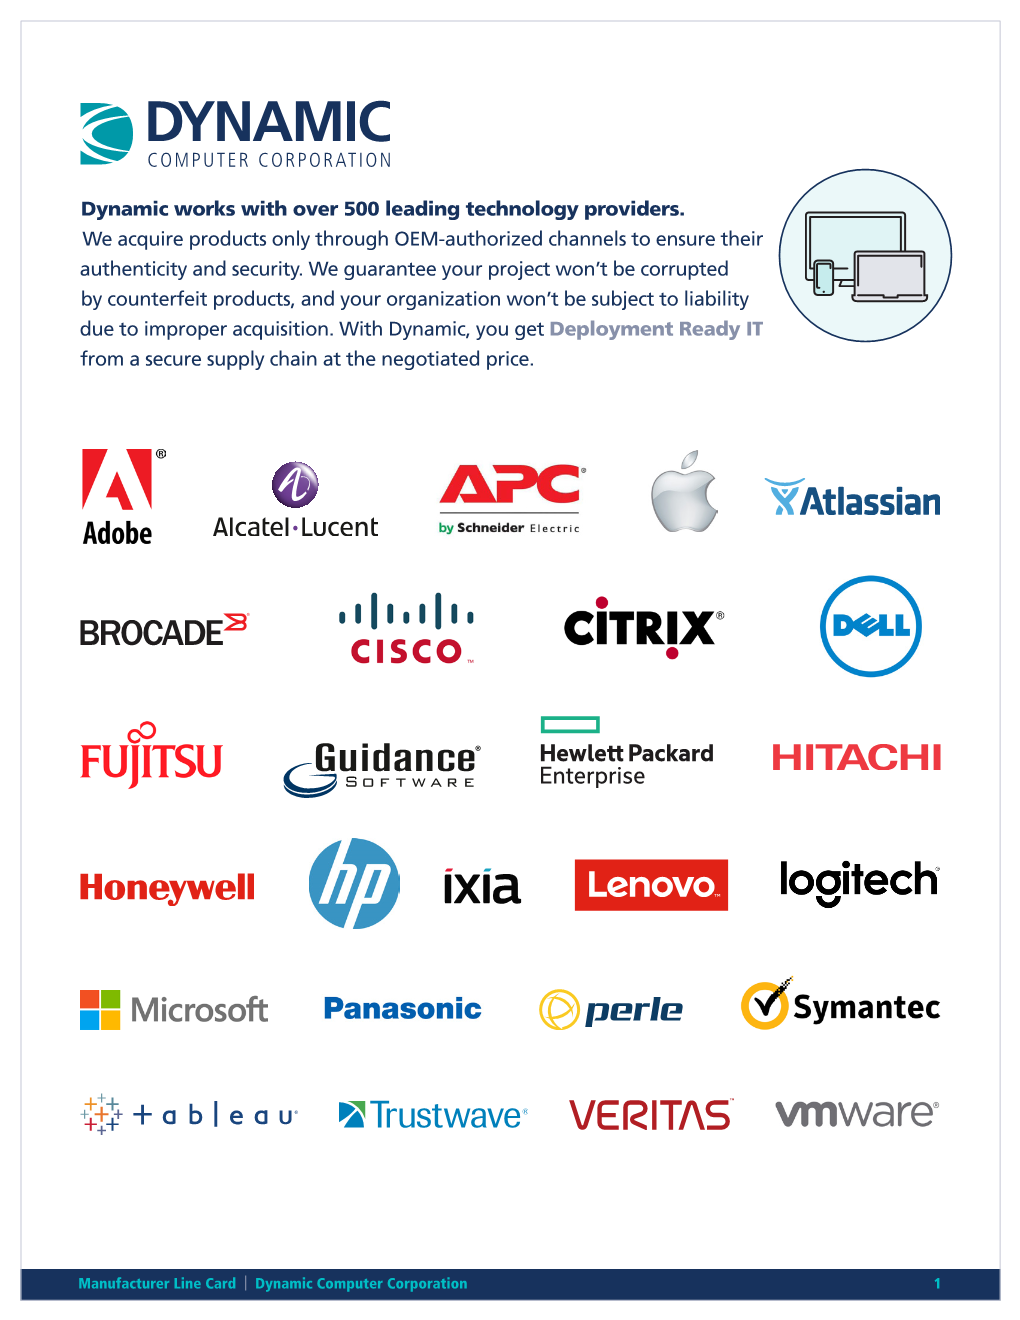 Dynamic Works with Over 500 Leading Technology Providers. We Acquire Products Only Through OEM-Authorized Channels to Ensure Their Authenticity and Security